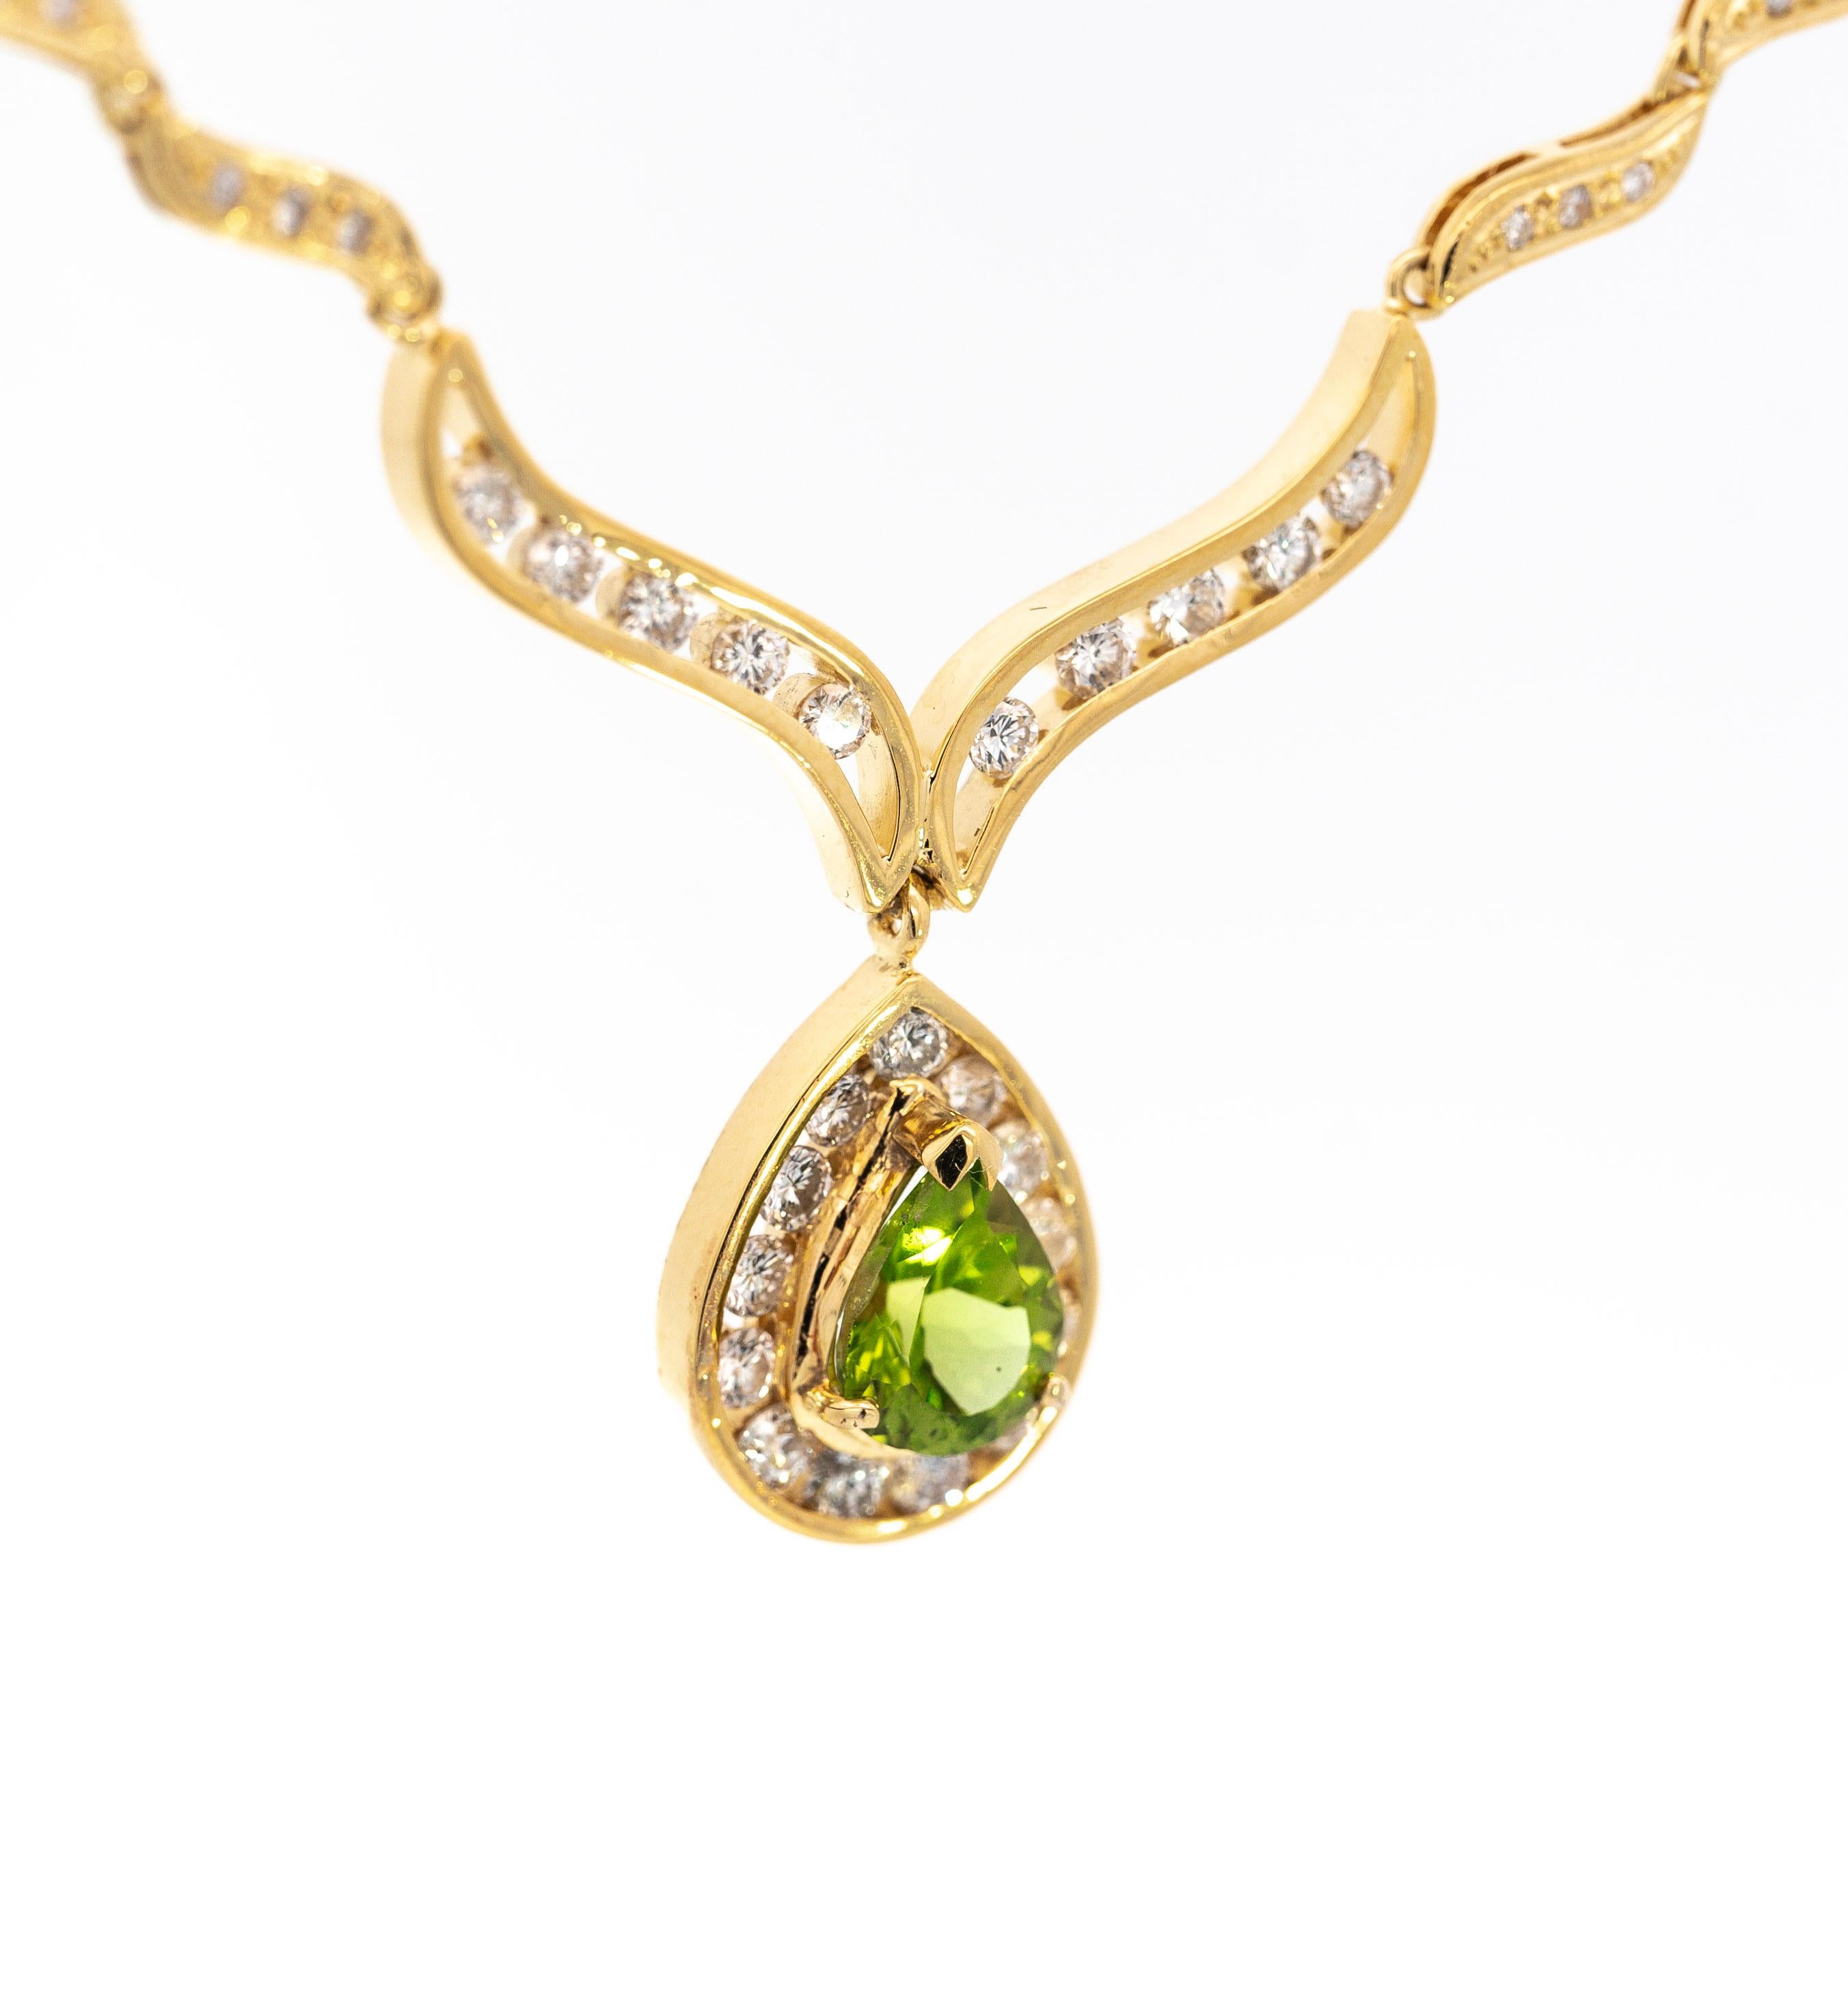 Vintage Pear Cut Green Peridot Drop Pendant Necklace with Diamonds in 18K Gold For Sale 3